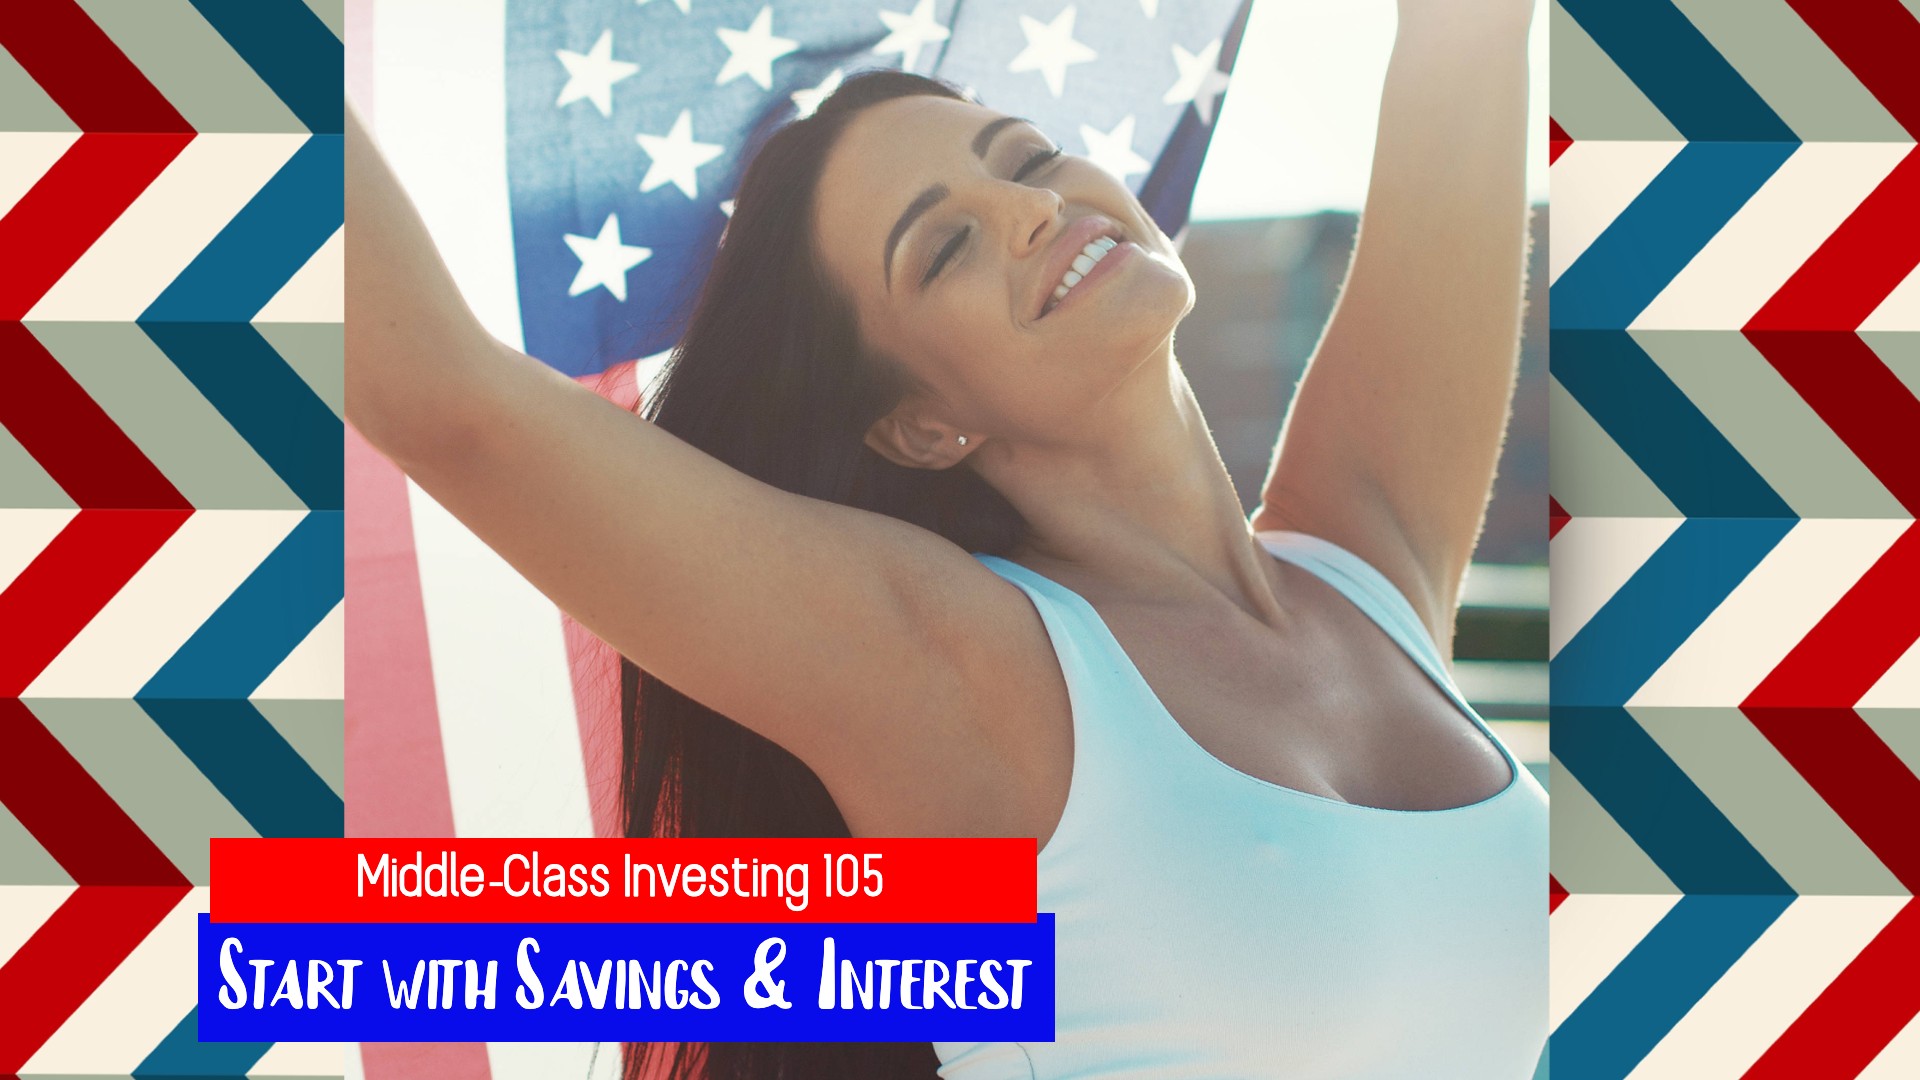 Middle-Class Investing 105: Start with Savings & Interest